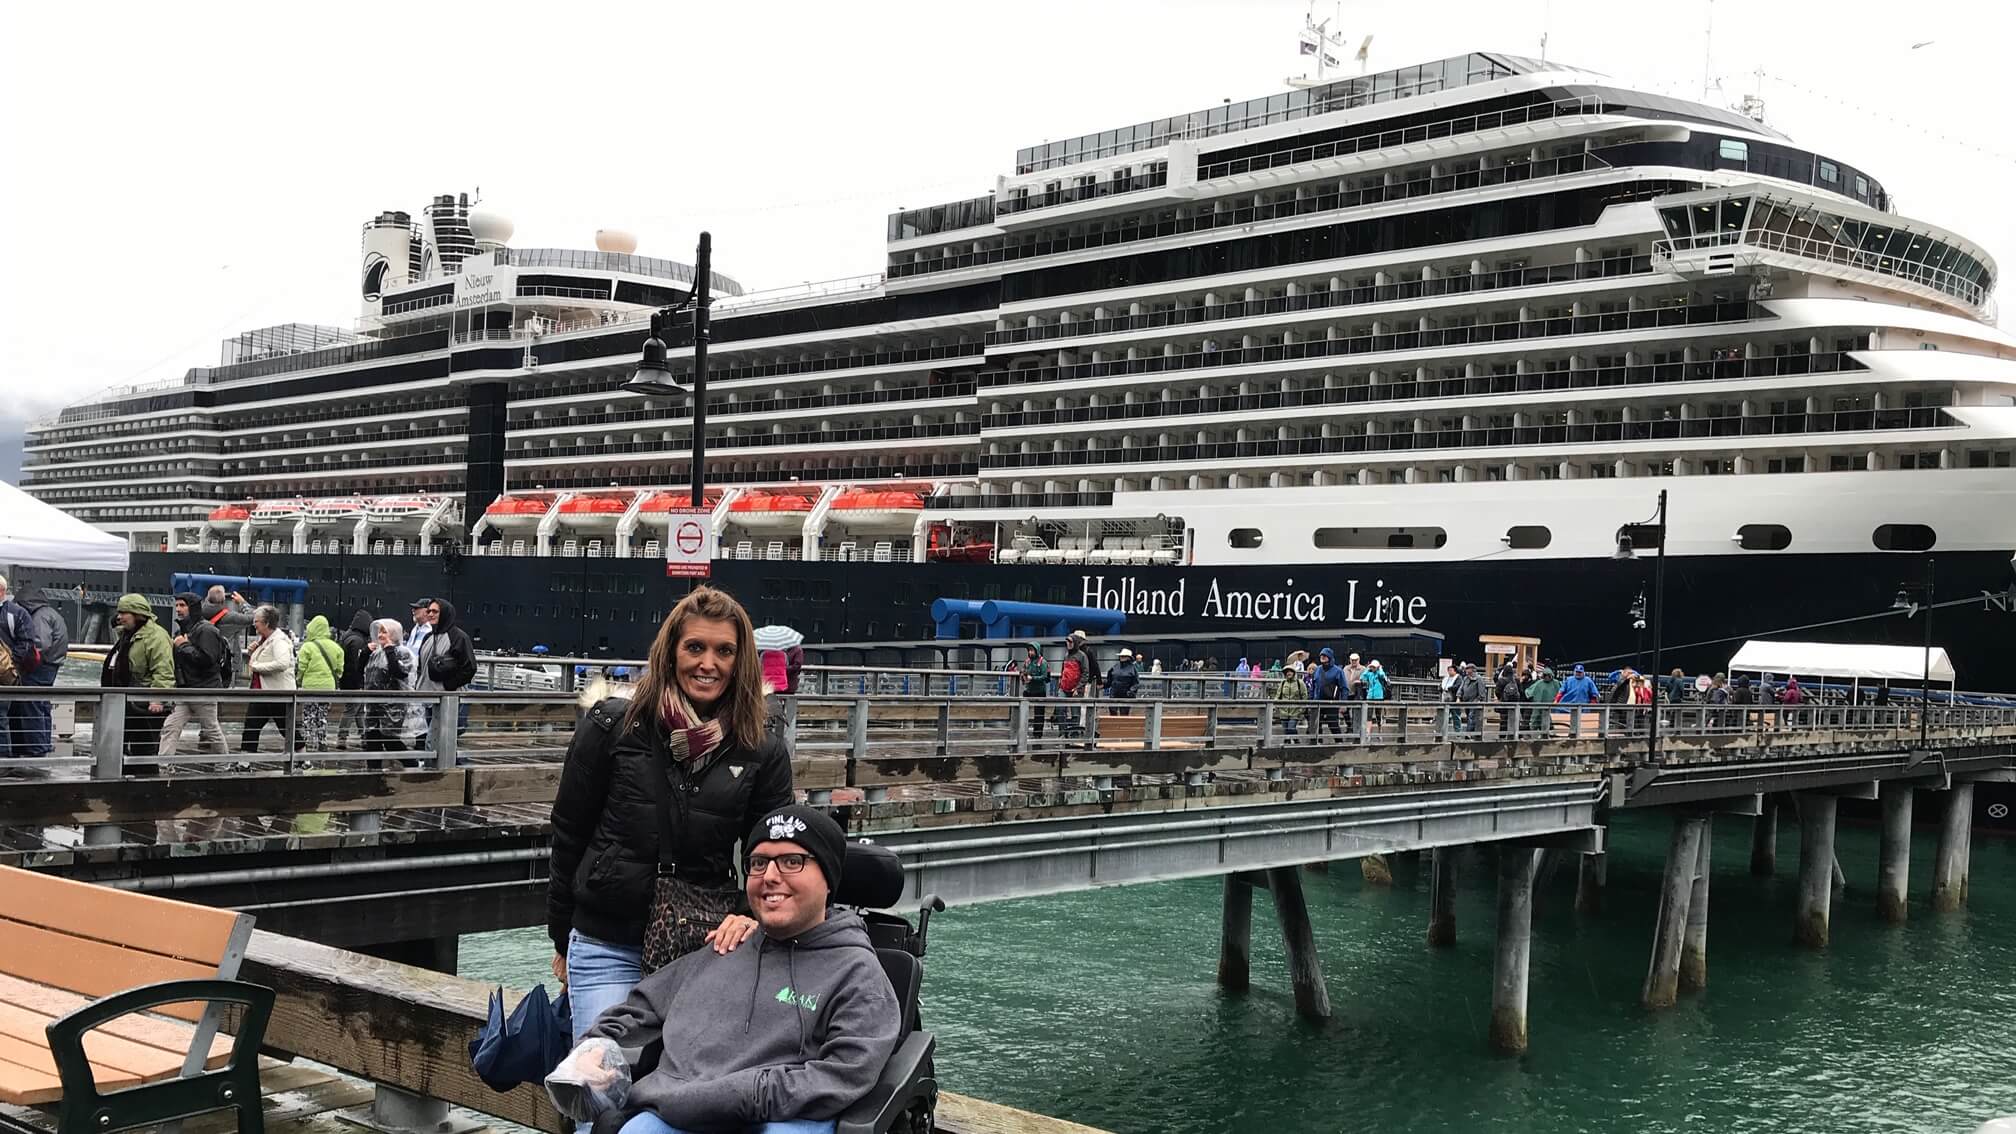 17 Reasons Why Holland America S Nieuw Amsterdam Ship Is The Best Images, Photos, Reviews